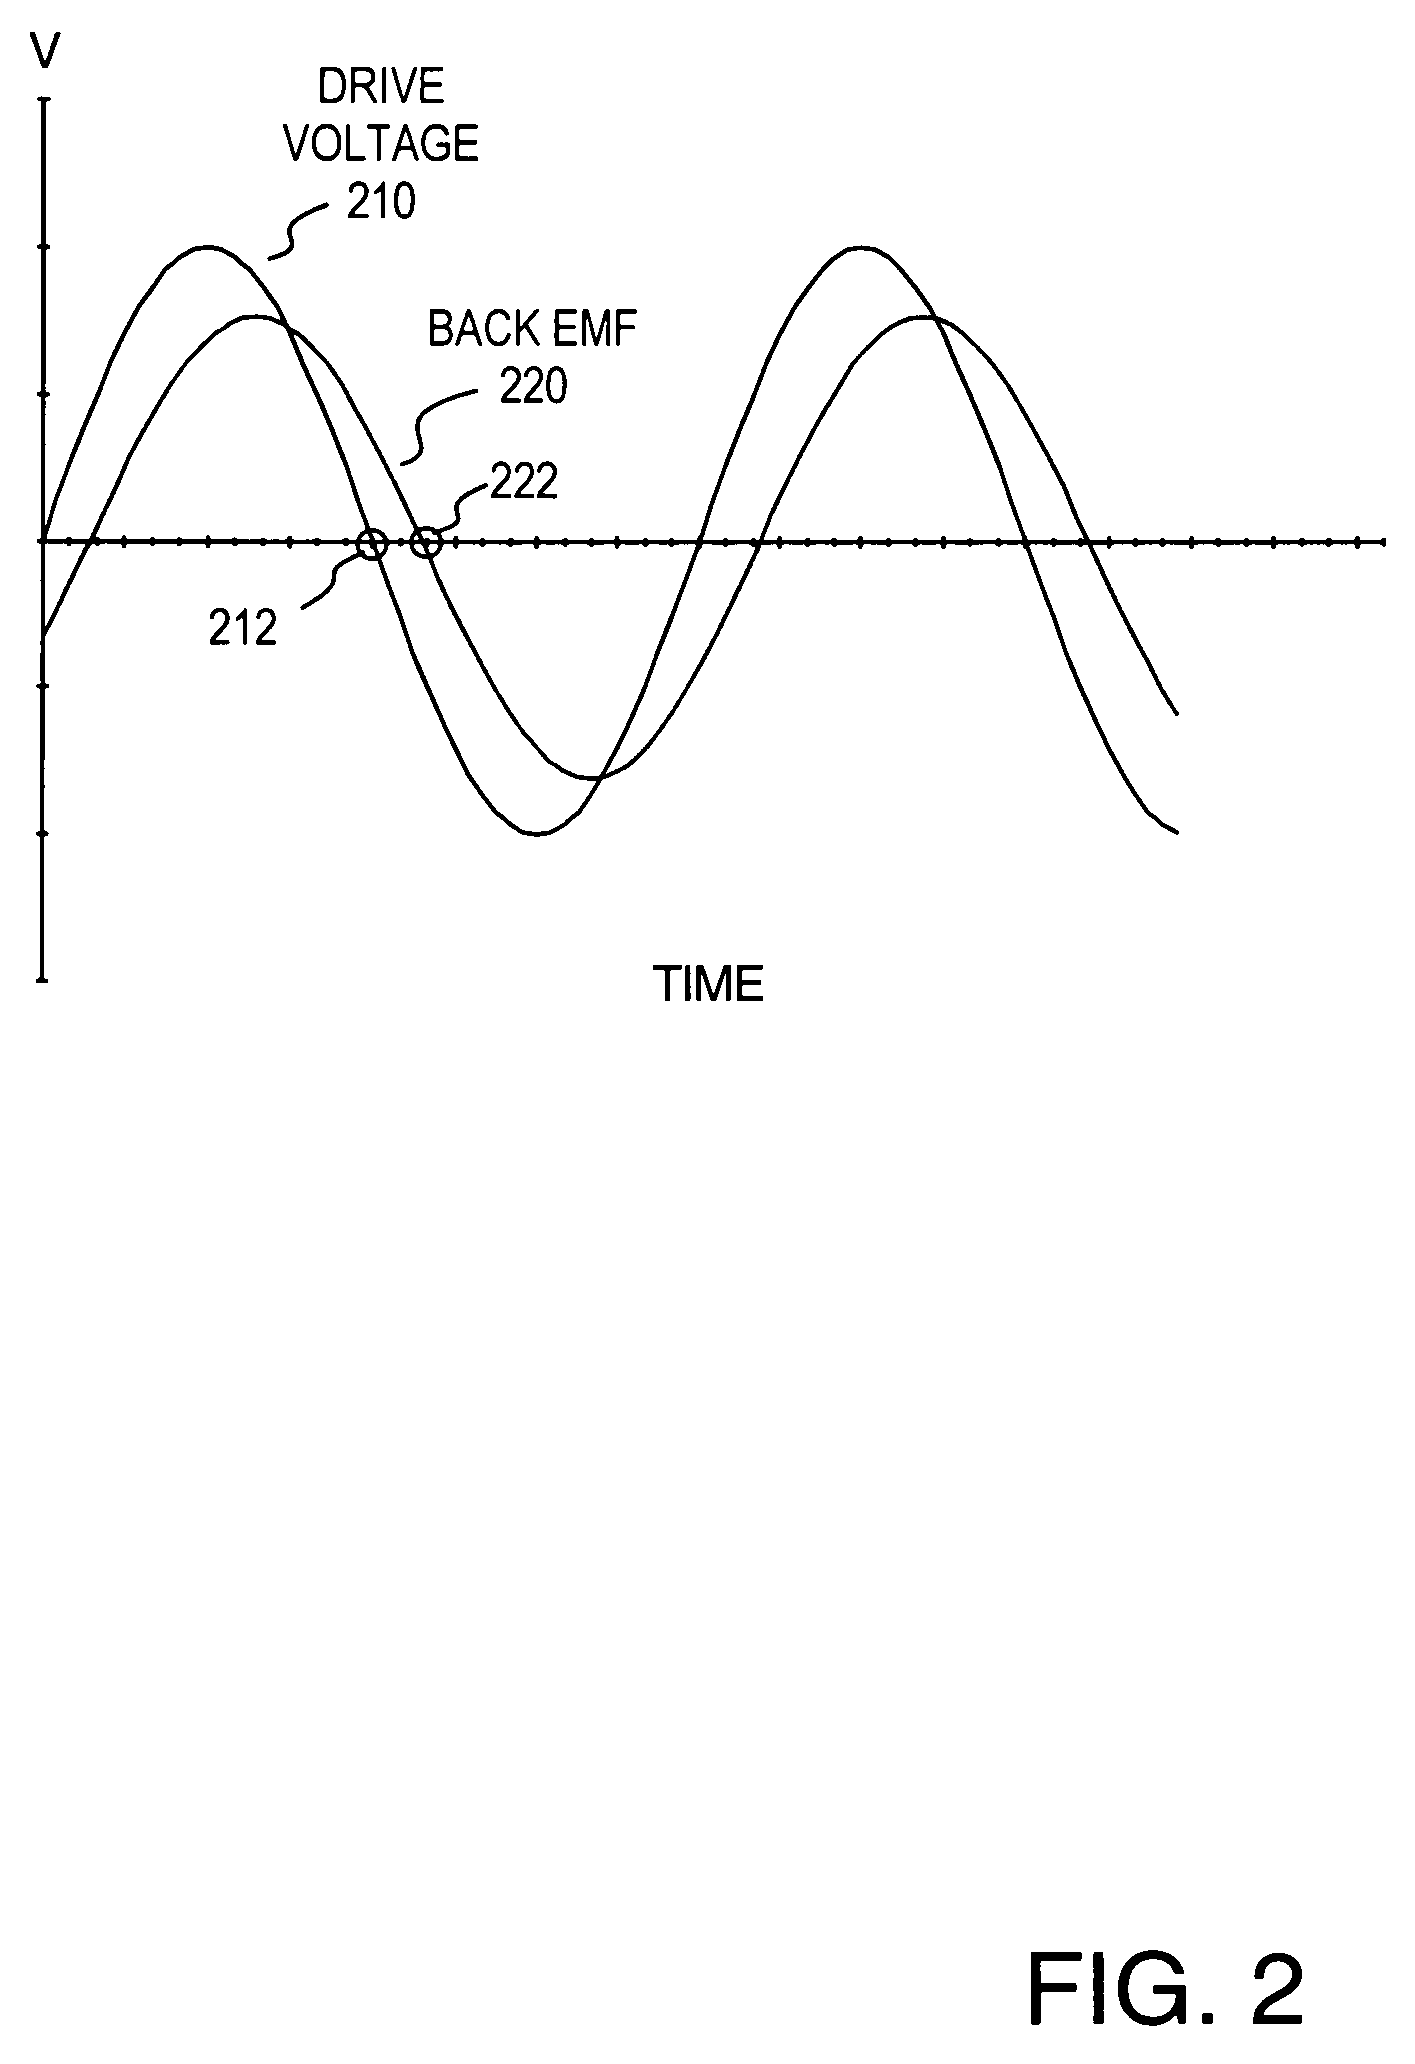 Method and apparatus for controlling brushless DC motors in implantable medical devices